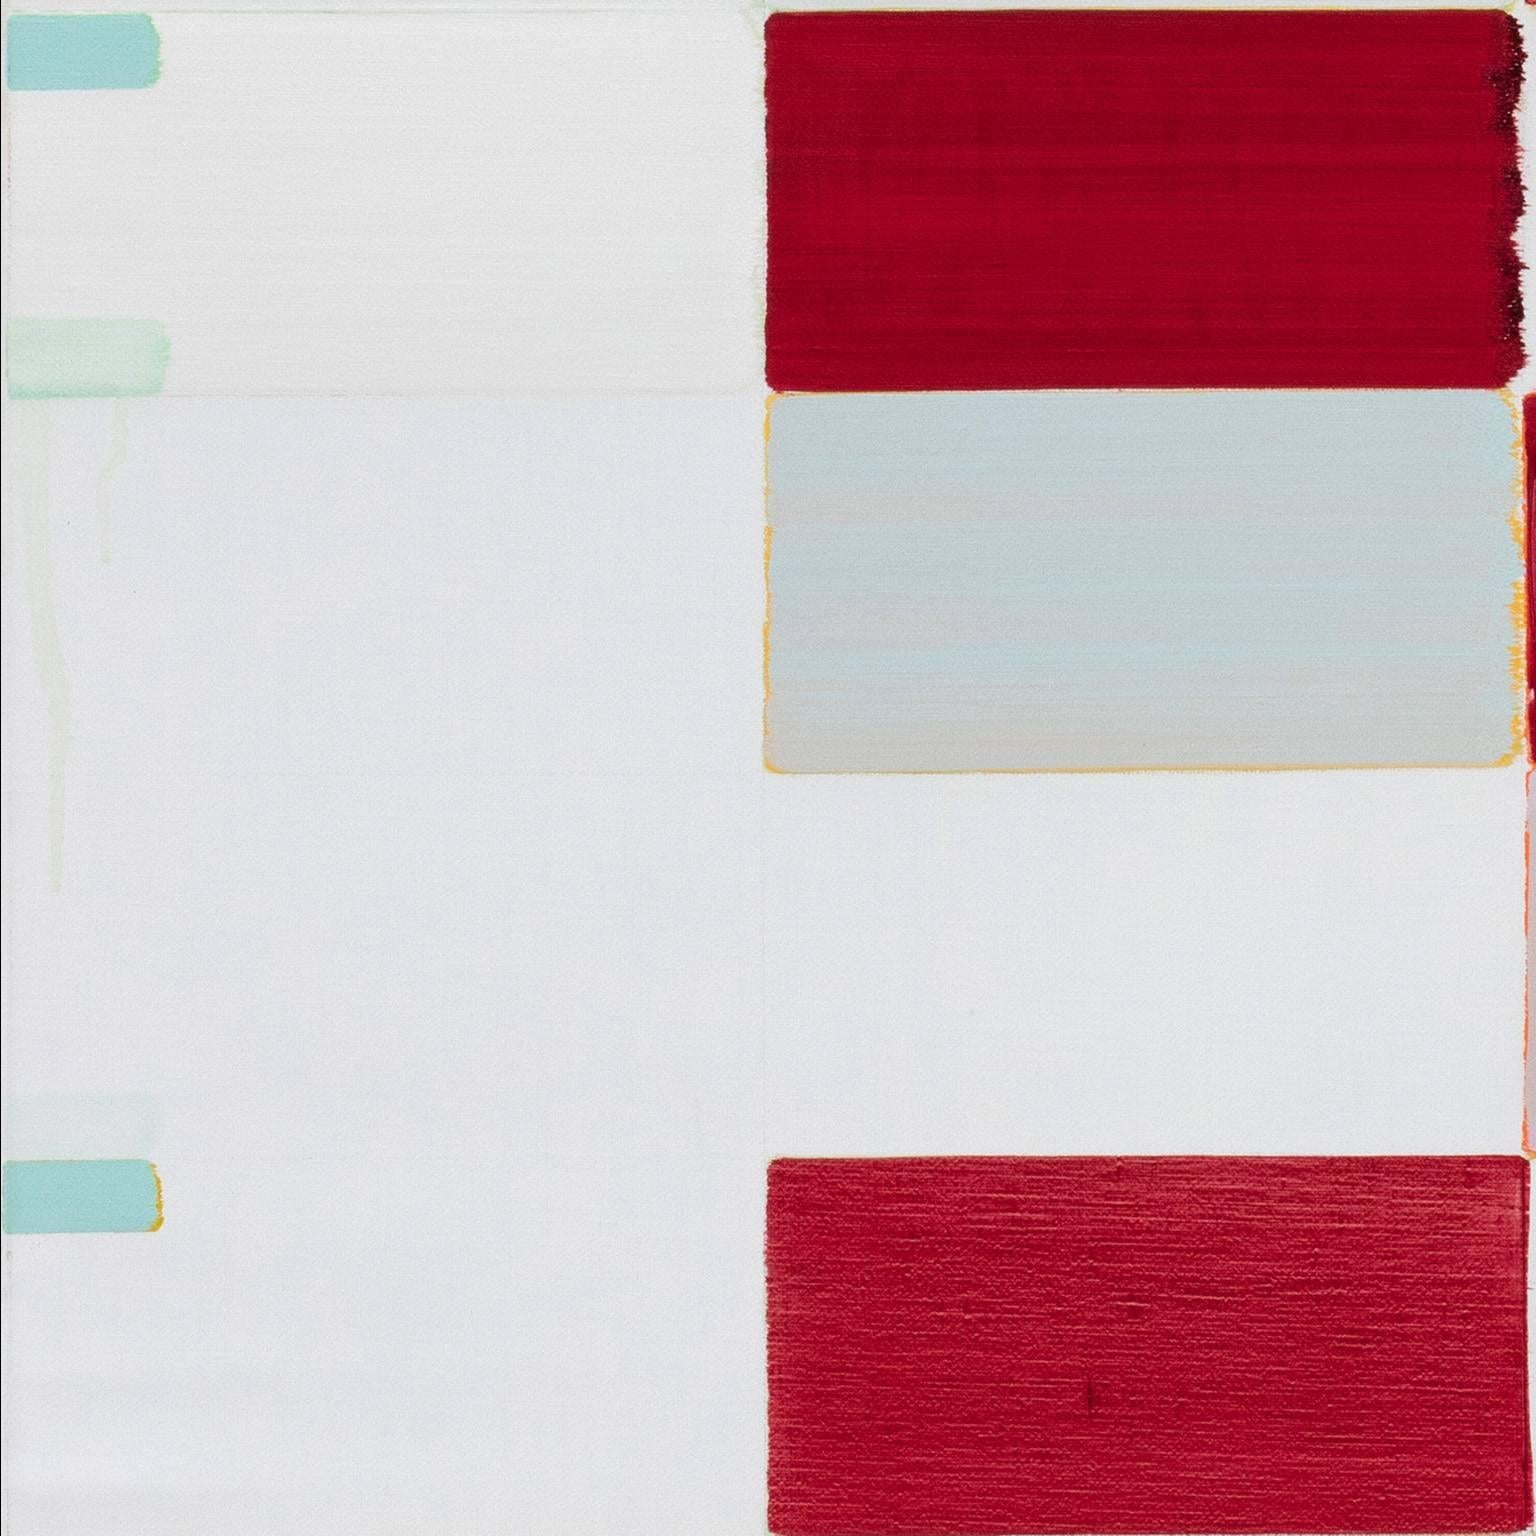 Roberto Caracciolo's Essere Altro is a 51.2 x 51.2 geometric abstract oil painting. Red rectangles rhythmically dialogue across the canvas, each rectangle with a different personality defined by the brush stroke.
As American art historian and art